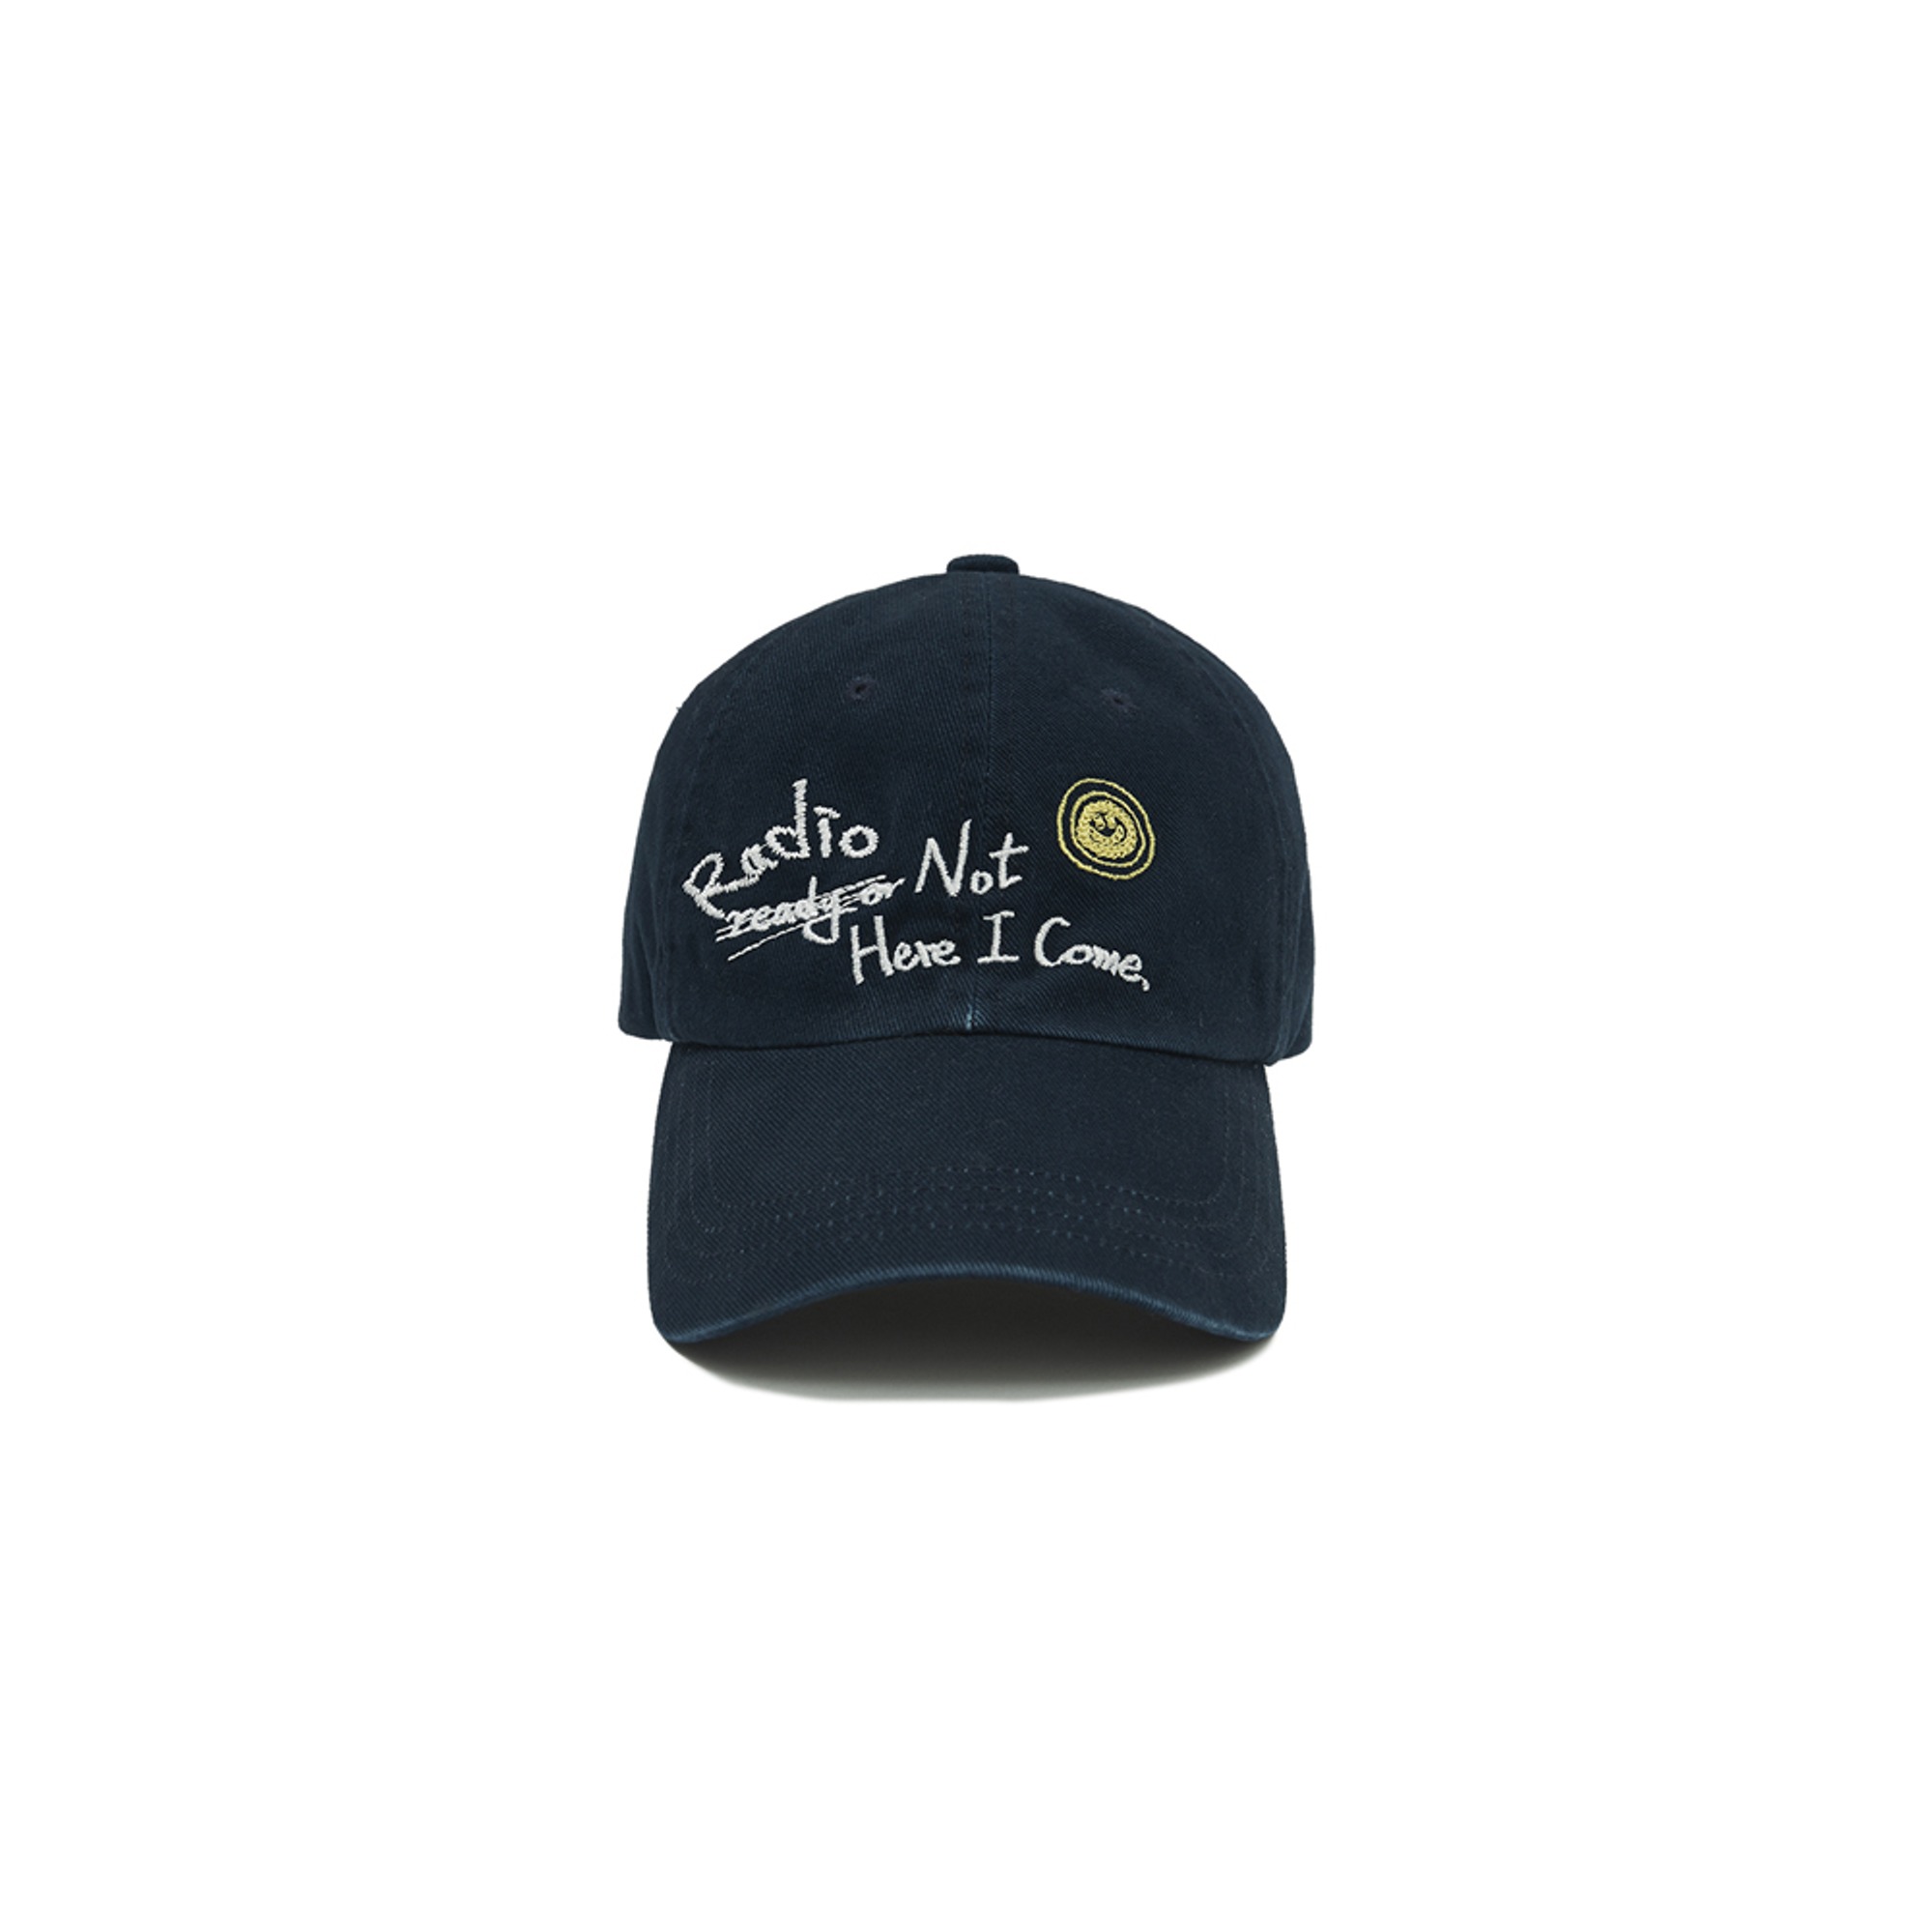 READY OR NOT SMILE EMBRODIERY BALL CAP KNA013m(NAVY)